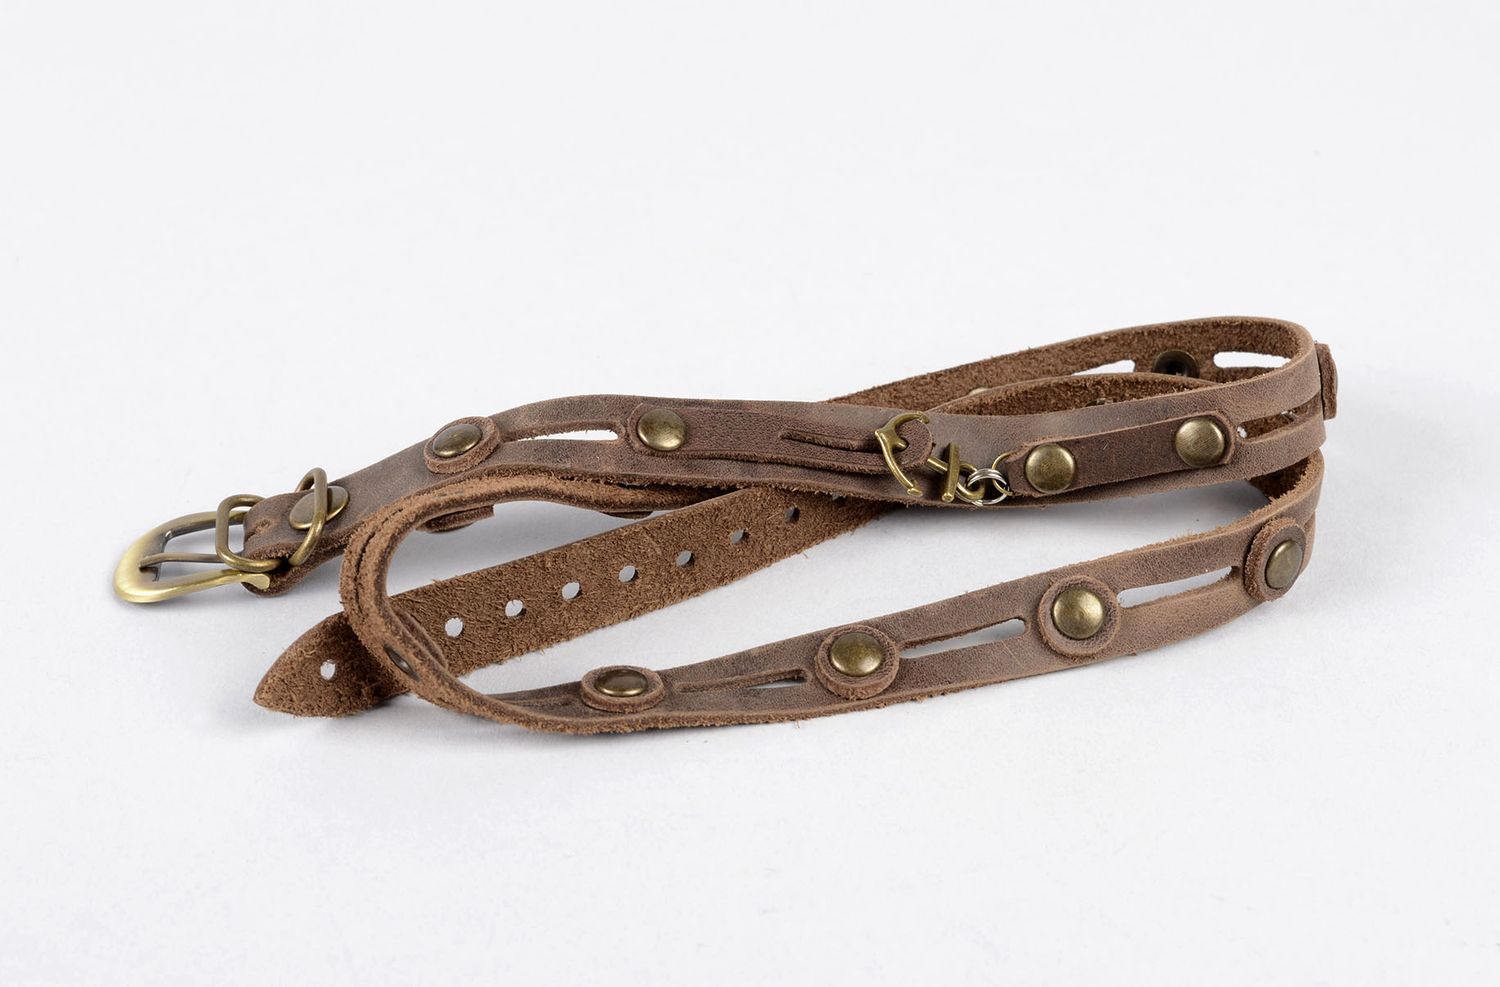 Handmade leather bracelet cool jewelry designs leather goods gift ideas photo 4